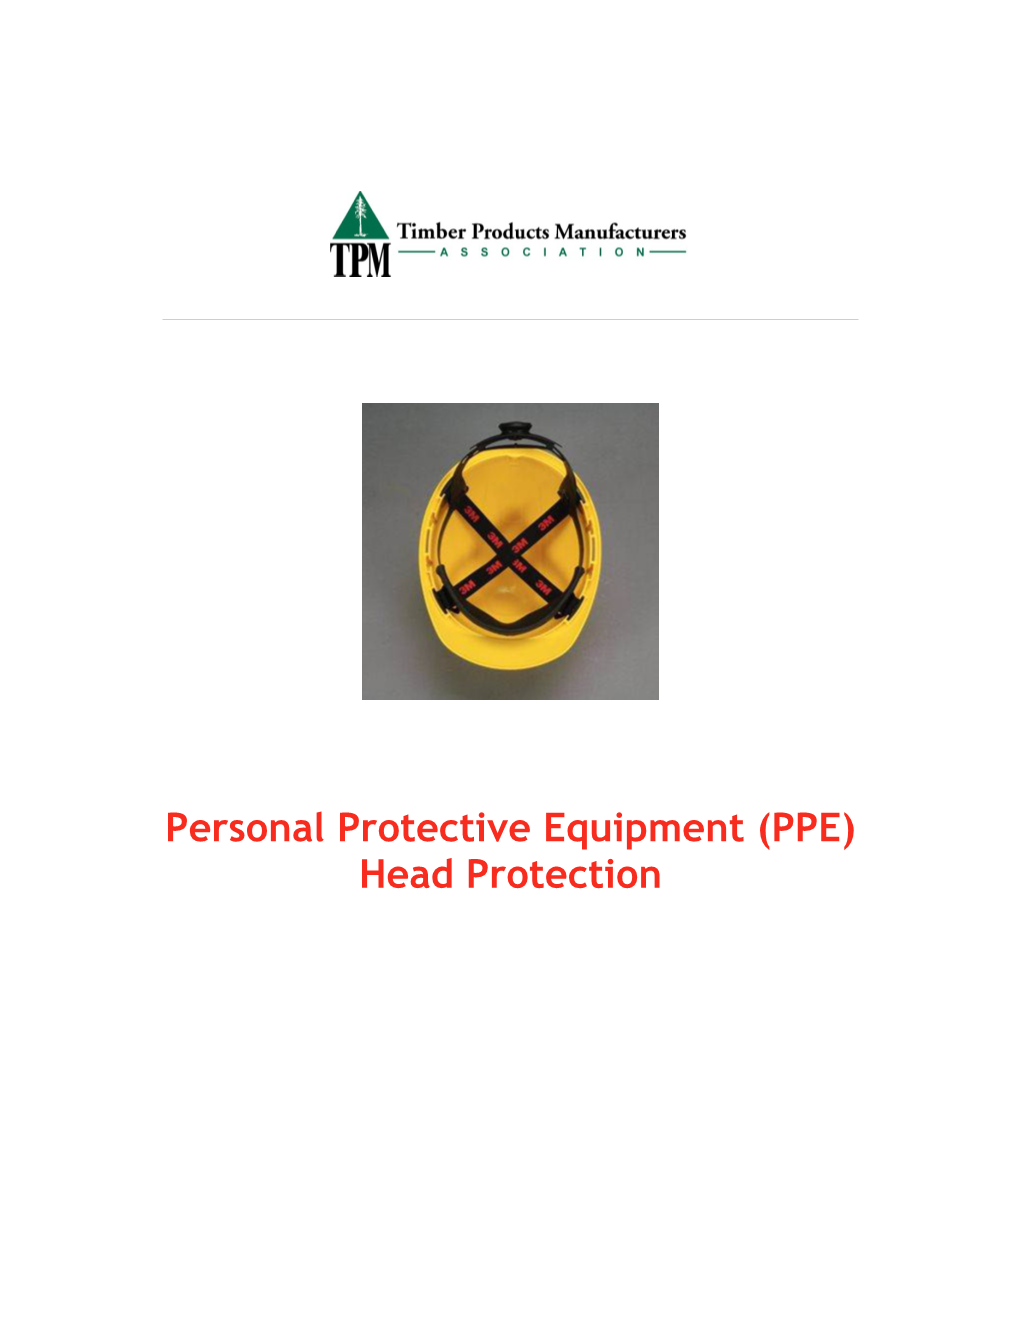 Personal Protective Equipment (PPE) Head Protection